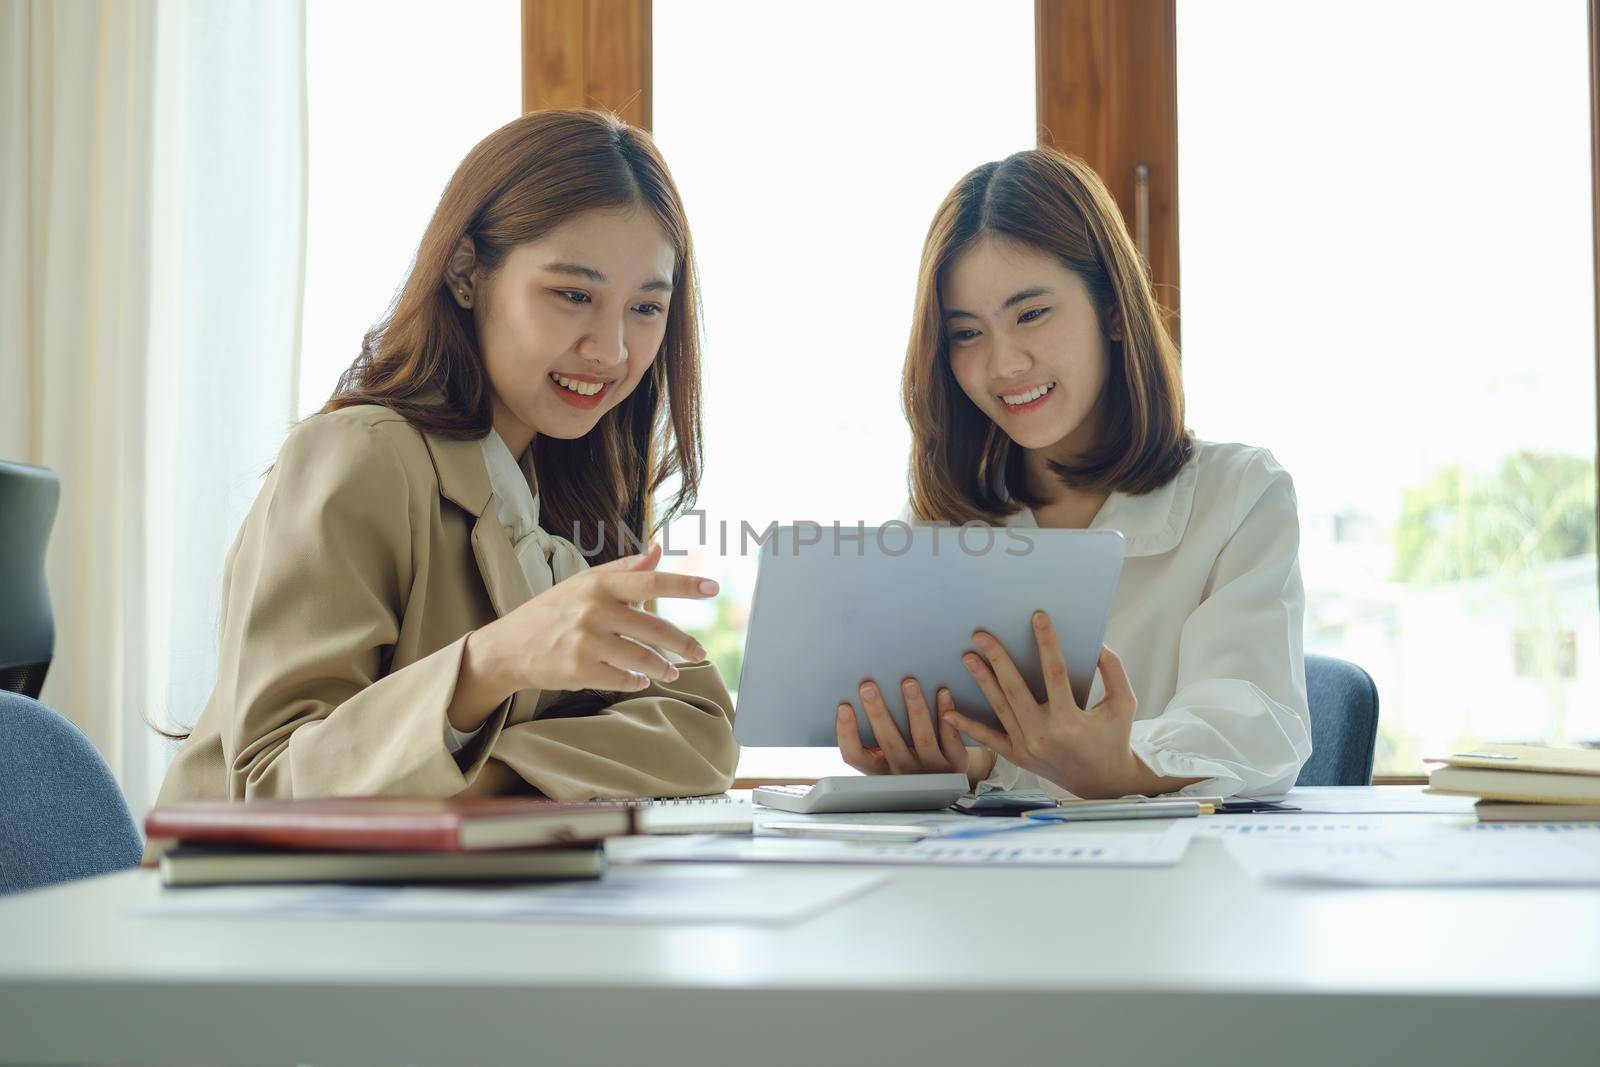 Negotiation, Analysis, Discussion, Portrait of an Asian women economist and marketer using tablet computer to plan investments and financial to prevent risks and losses for the company by Manastrong